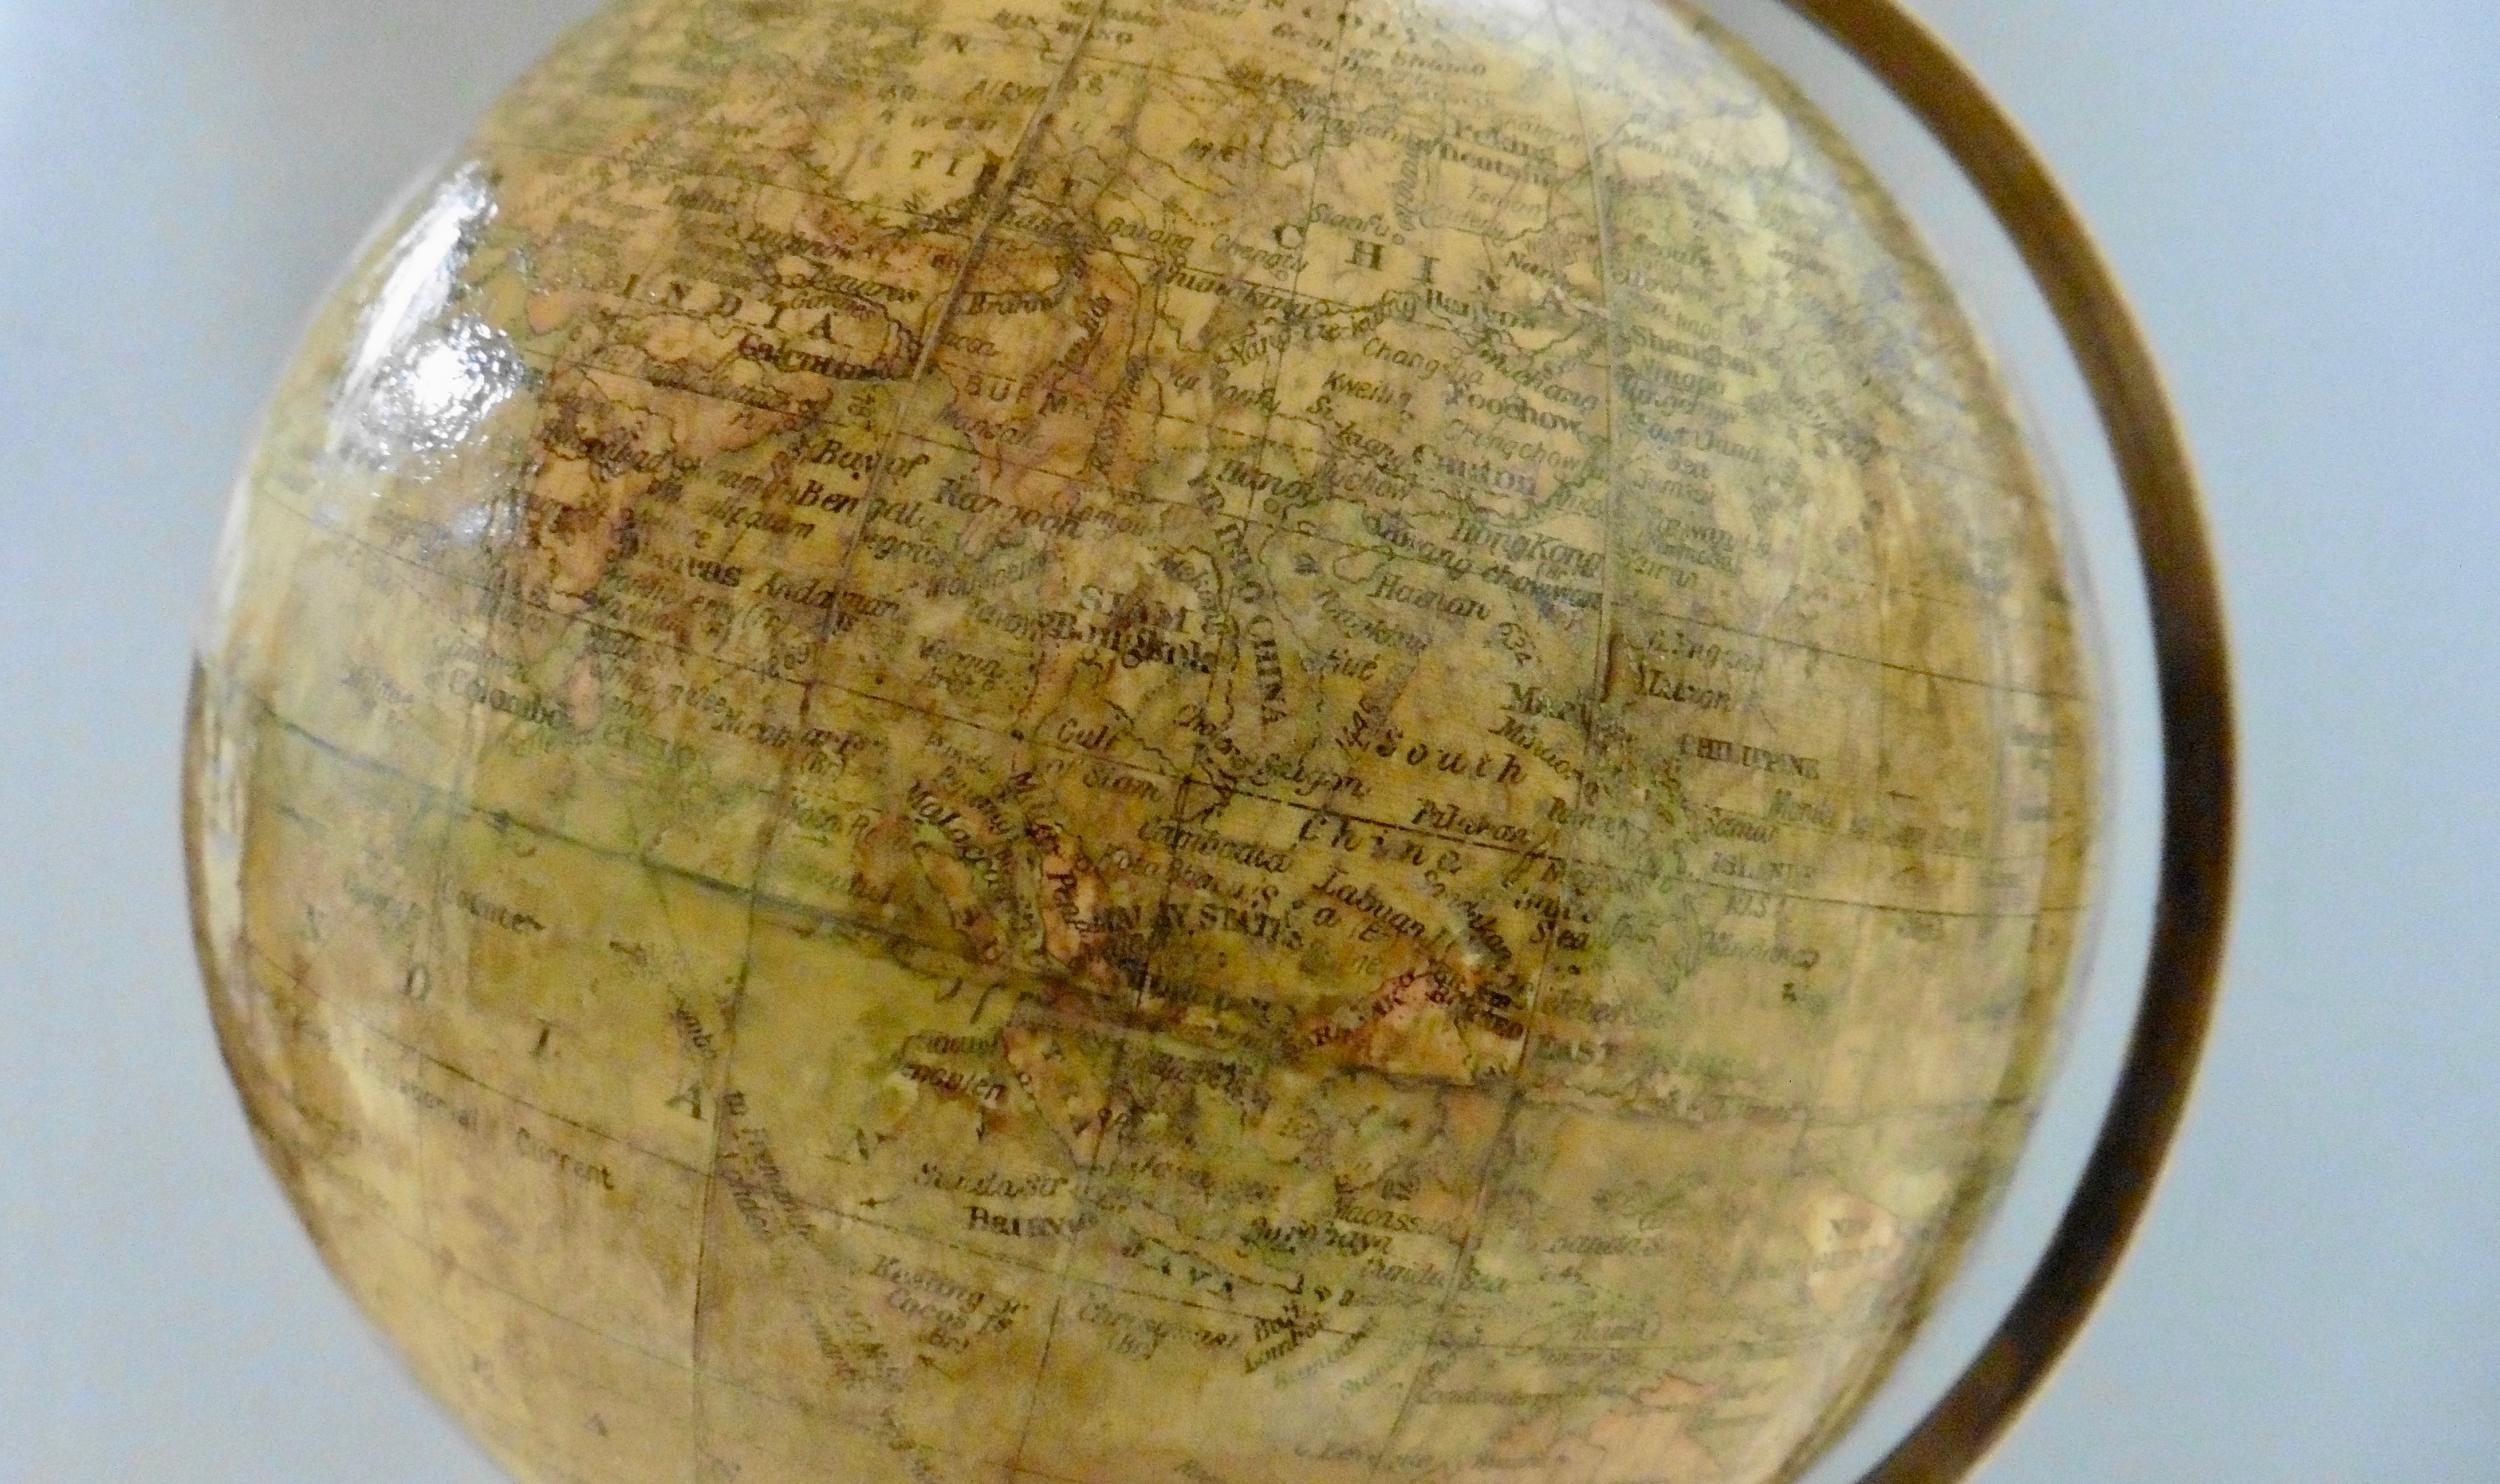 Fine Miniature Terrestrial Geographia 6 inch table globe standing on an ebonised circular base with half meridian surmounted by a turned finial.

The globe is complete with it’s original colored paper gores and maintains a good colour with little